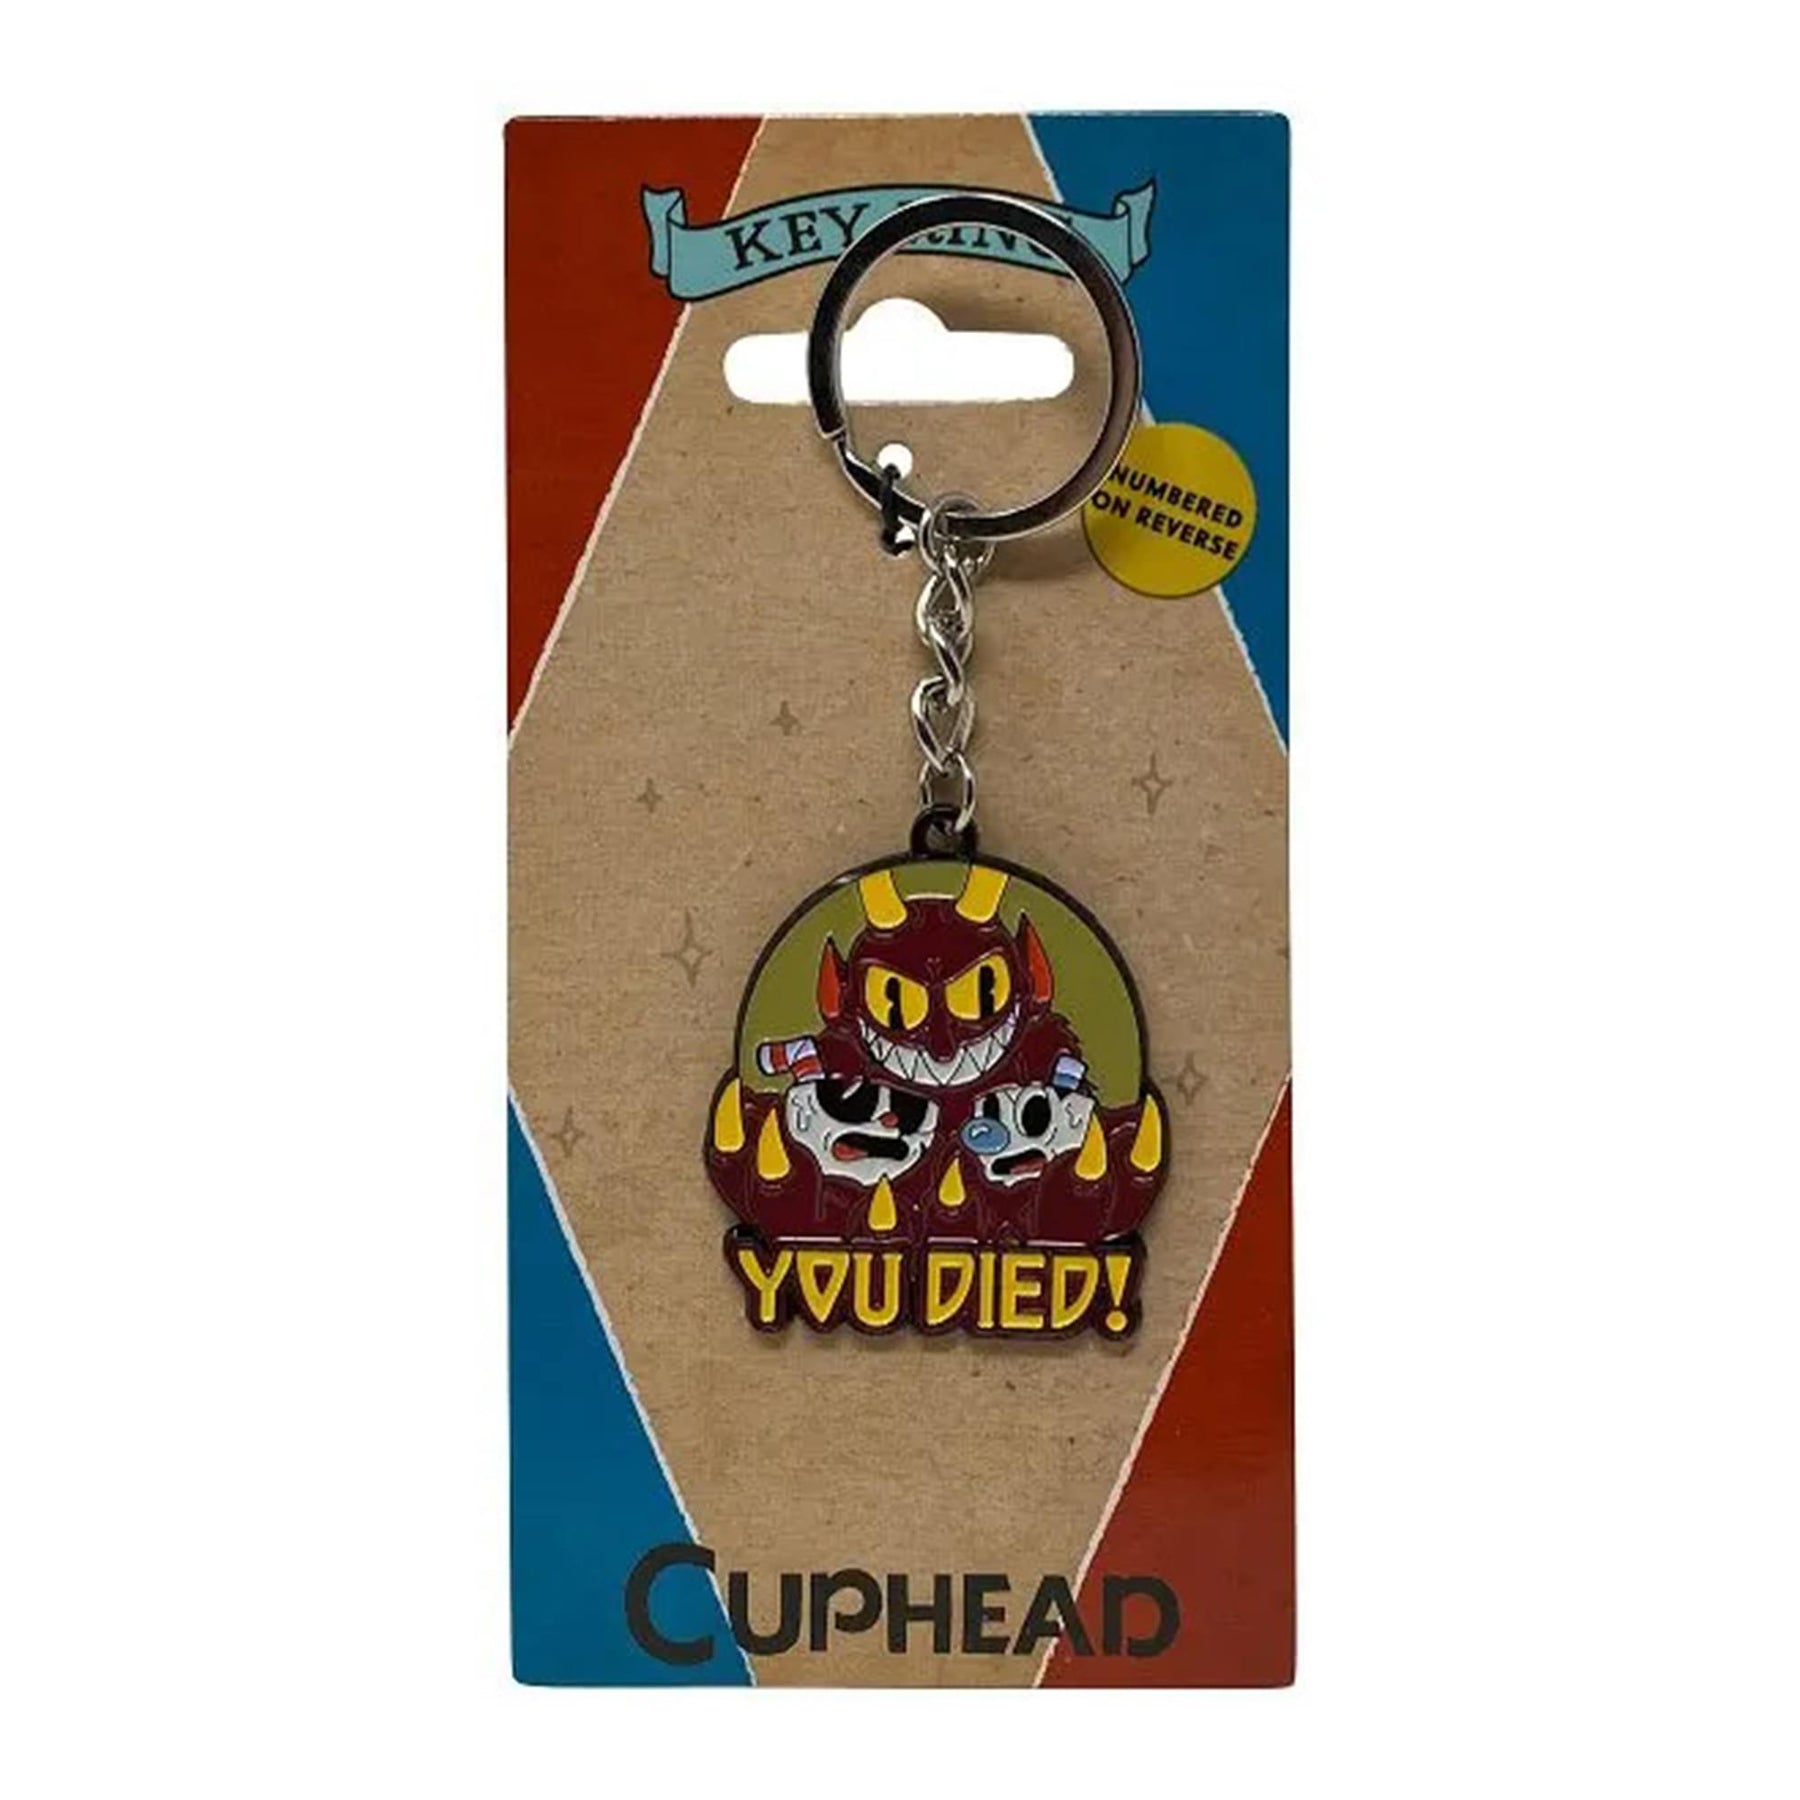 Cuphead Limited Edition "You Died" Key Ring